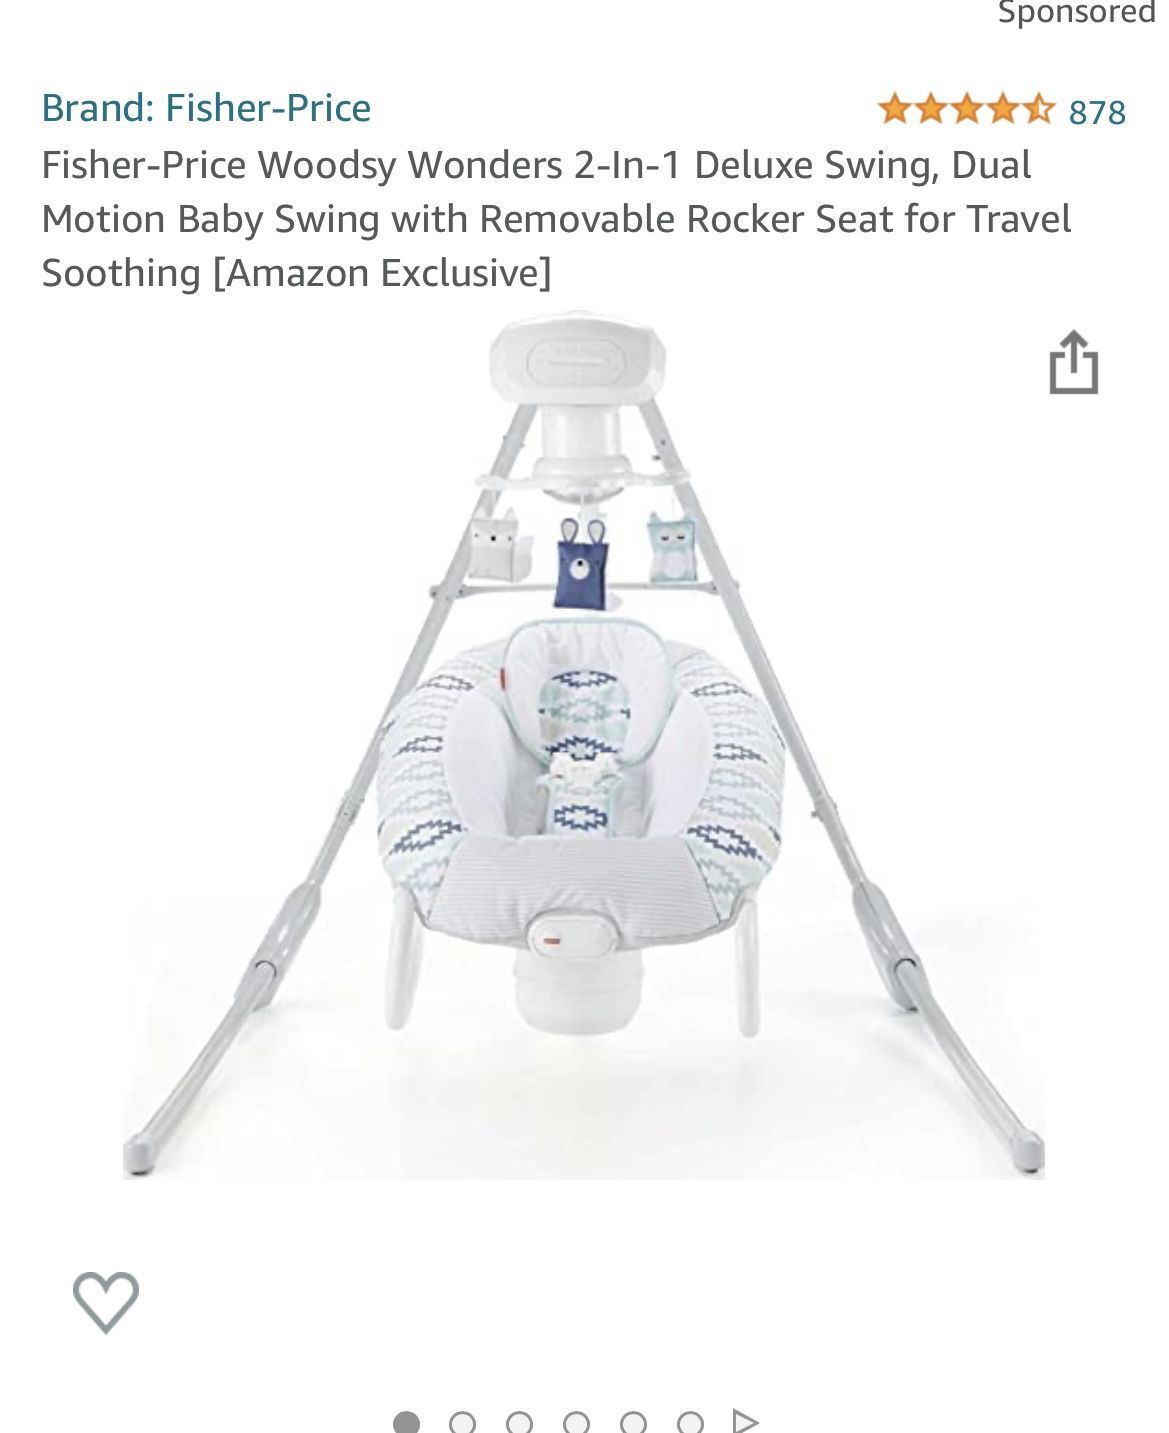 Fisher-Price 2-In-1 Deluxe Swing